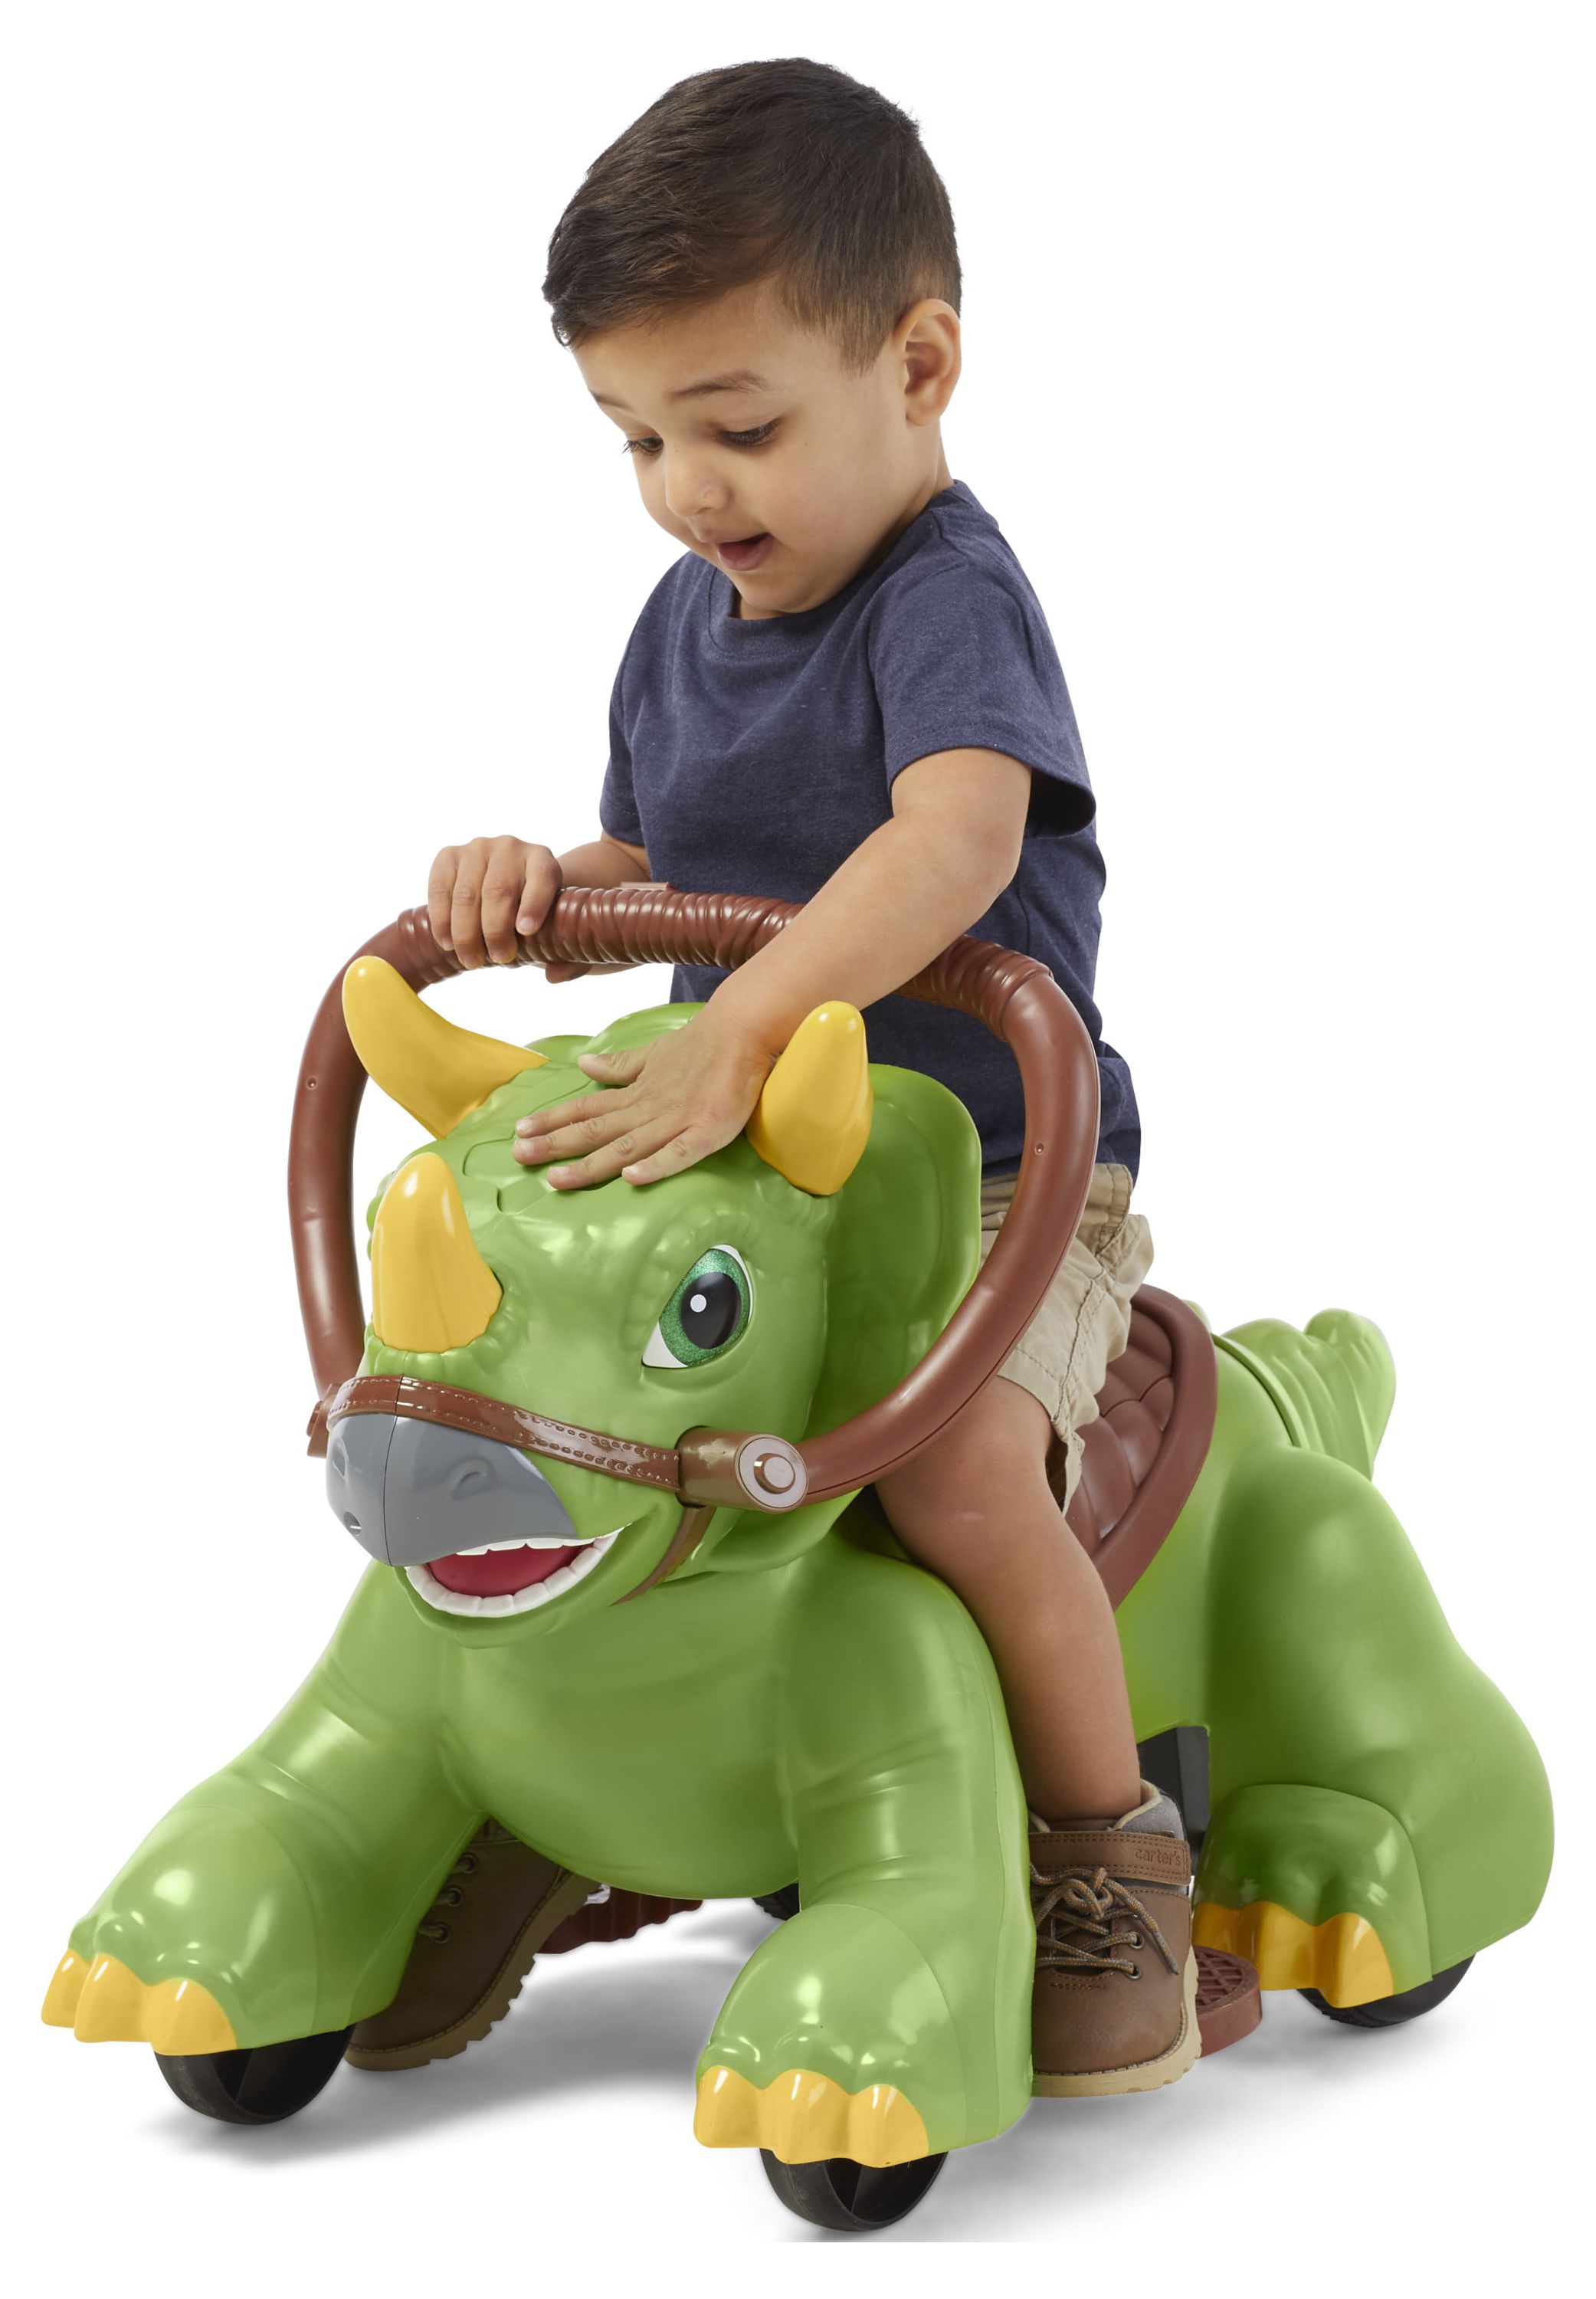 Rideamals Dinosaur Ride-On Toy by Kid Trax, powered rechargeable toddler, boys or girls, toddler - image 5 of 10